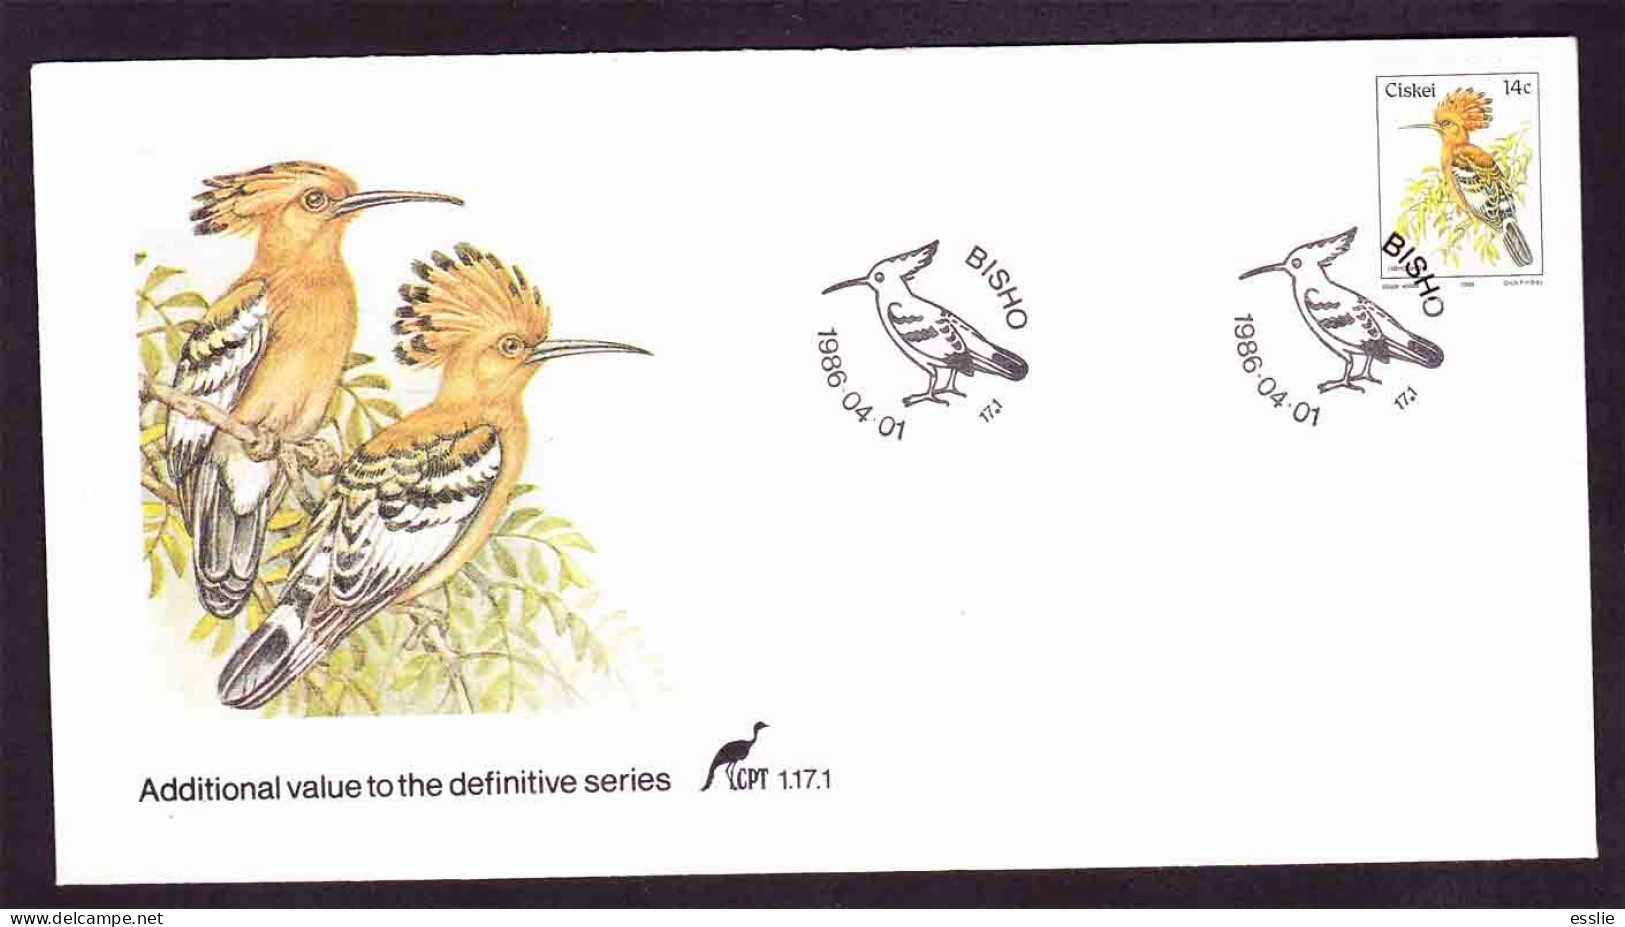 Ciskei - 1986 (1981) - Birds First Definitive - Additional Value - Hoopoe - First Day Cover - Small - Ciskei